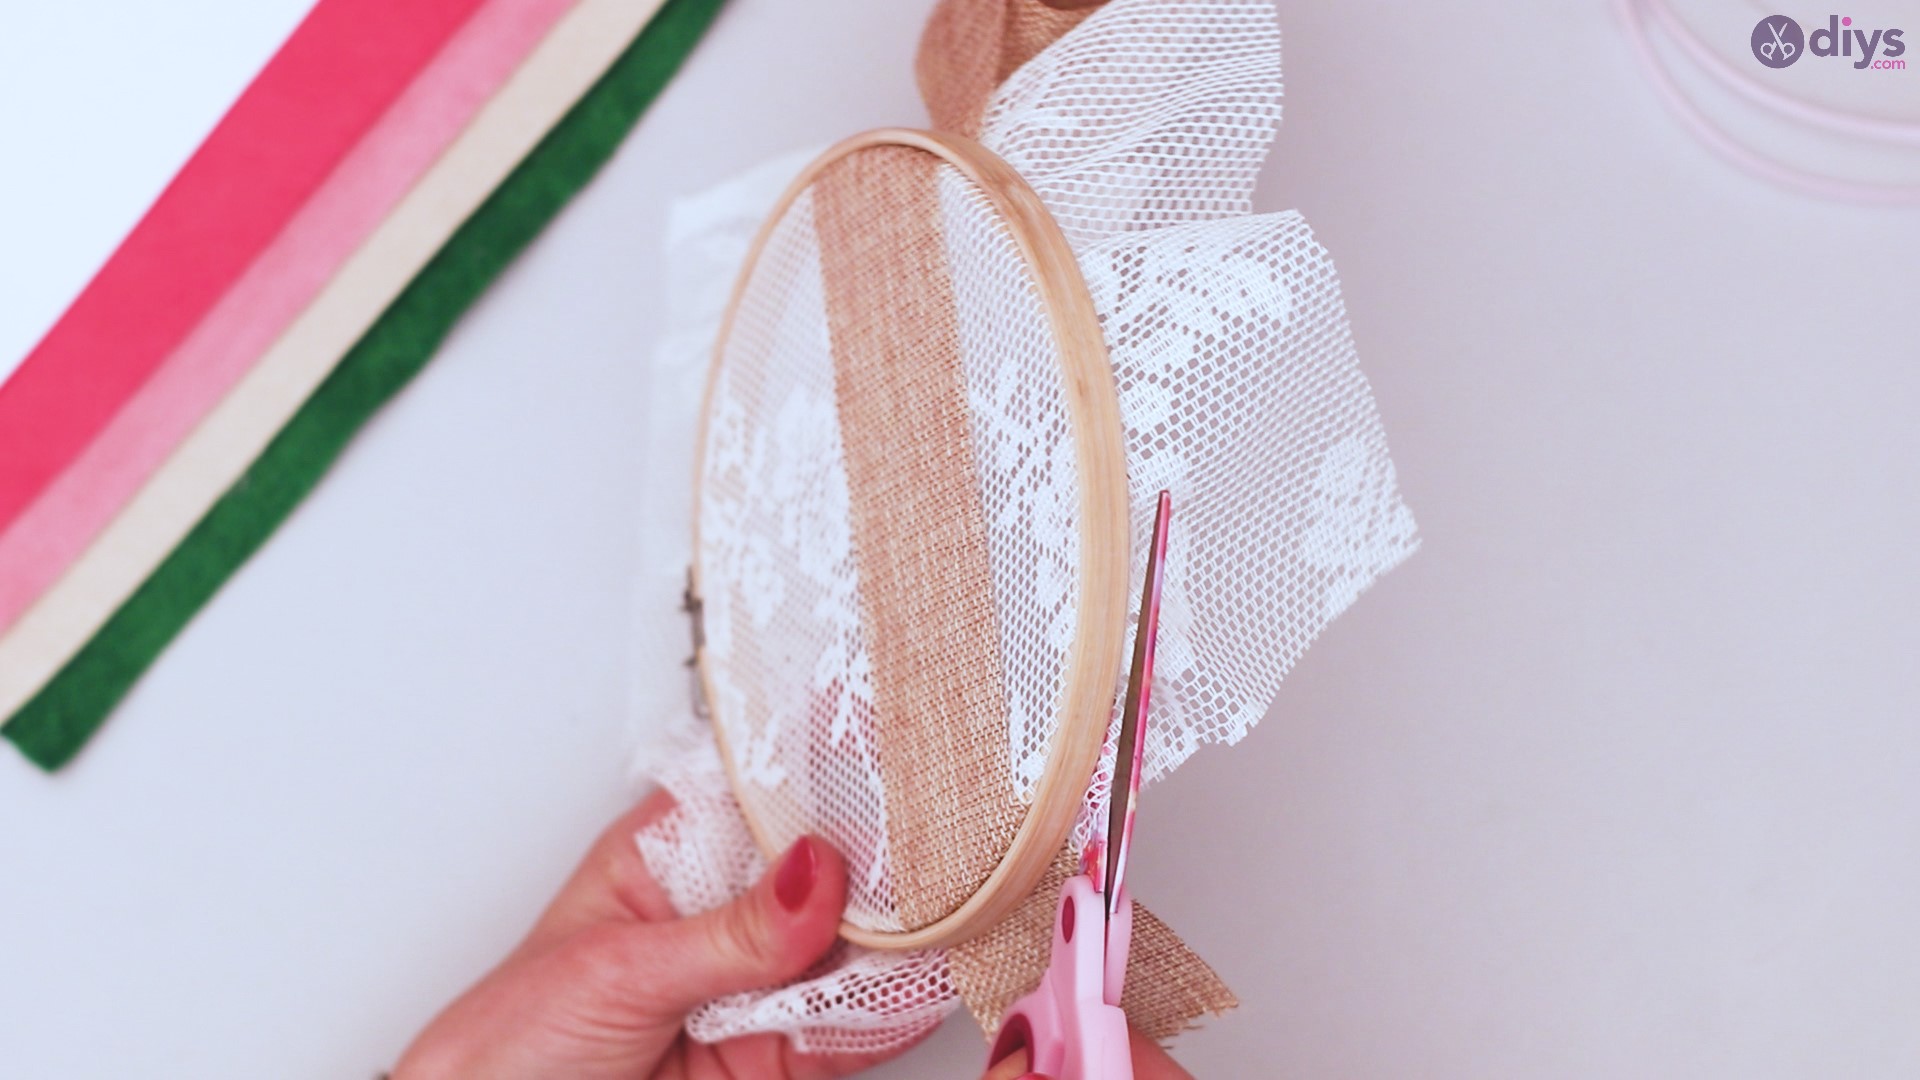 Diy embroidery hoop wall decor tutorial step by step (7)